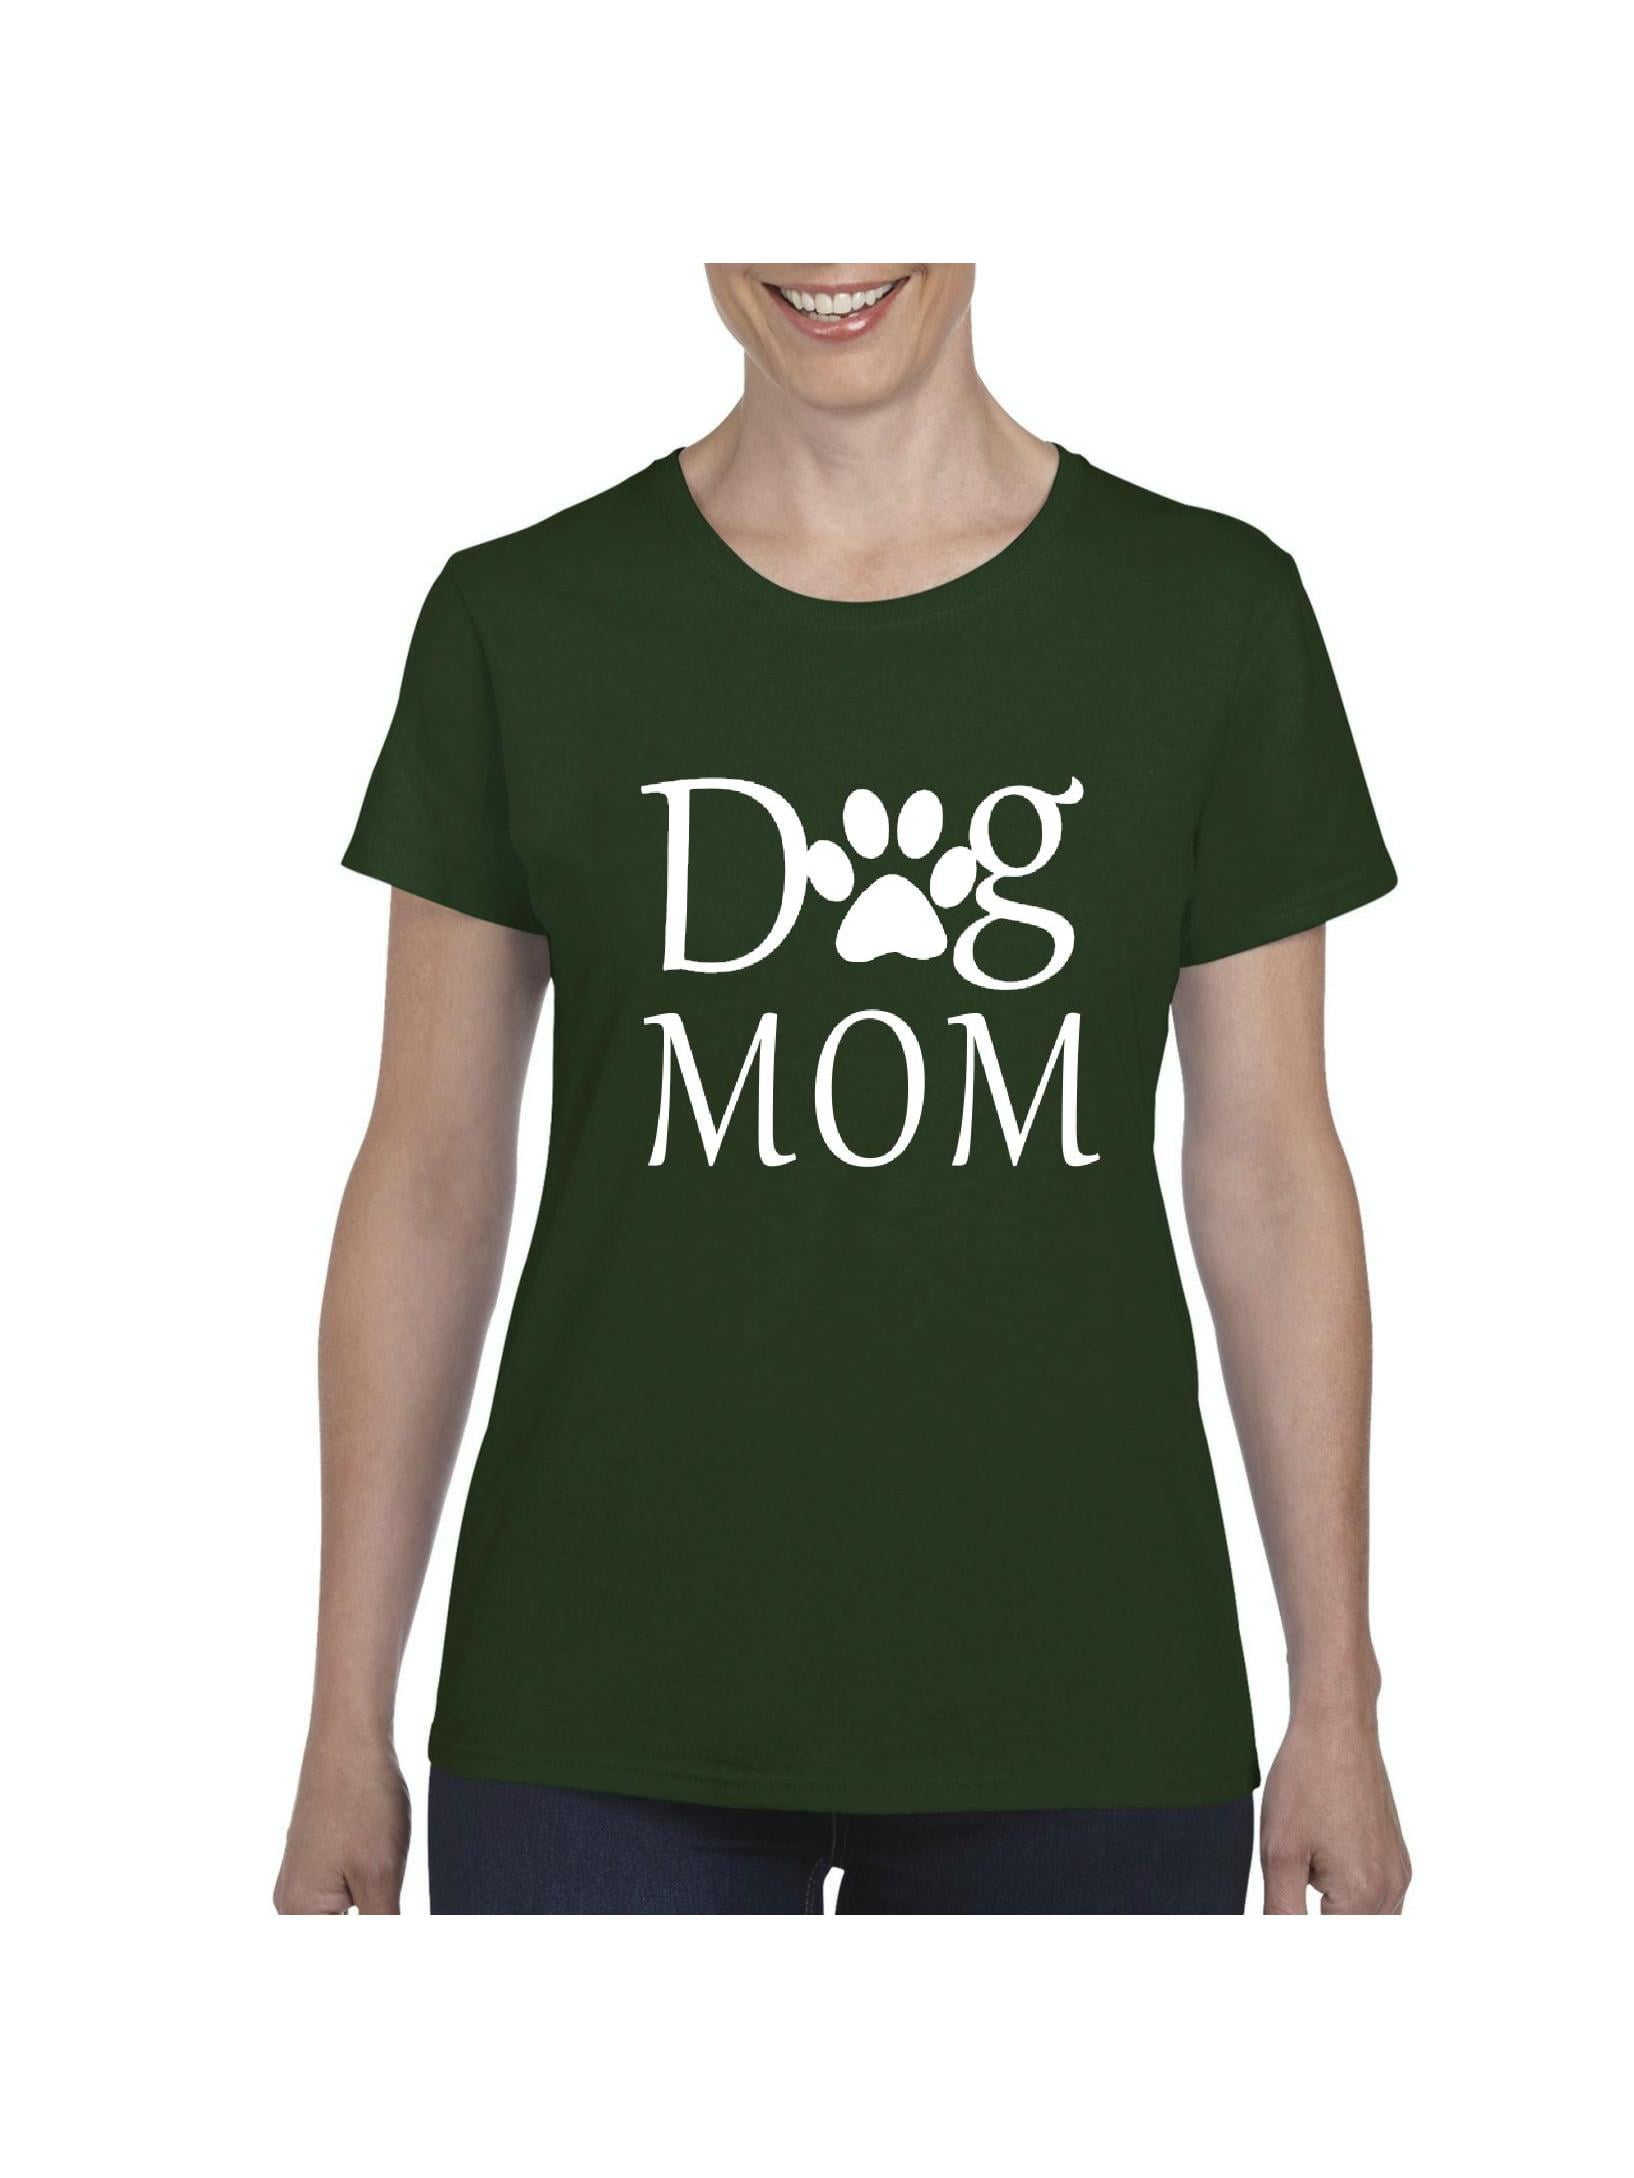 Cute Graphic Tee For Dog Moms Life Is Better With Dogs Short-Sleeve Unisex T-Shirt Cute Dog T-shirt Gift Idea for Girlfriend